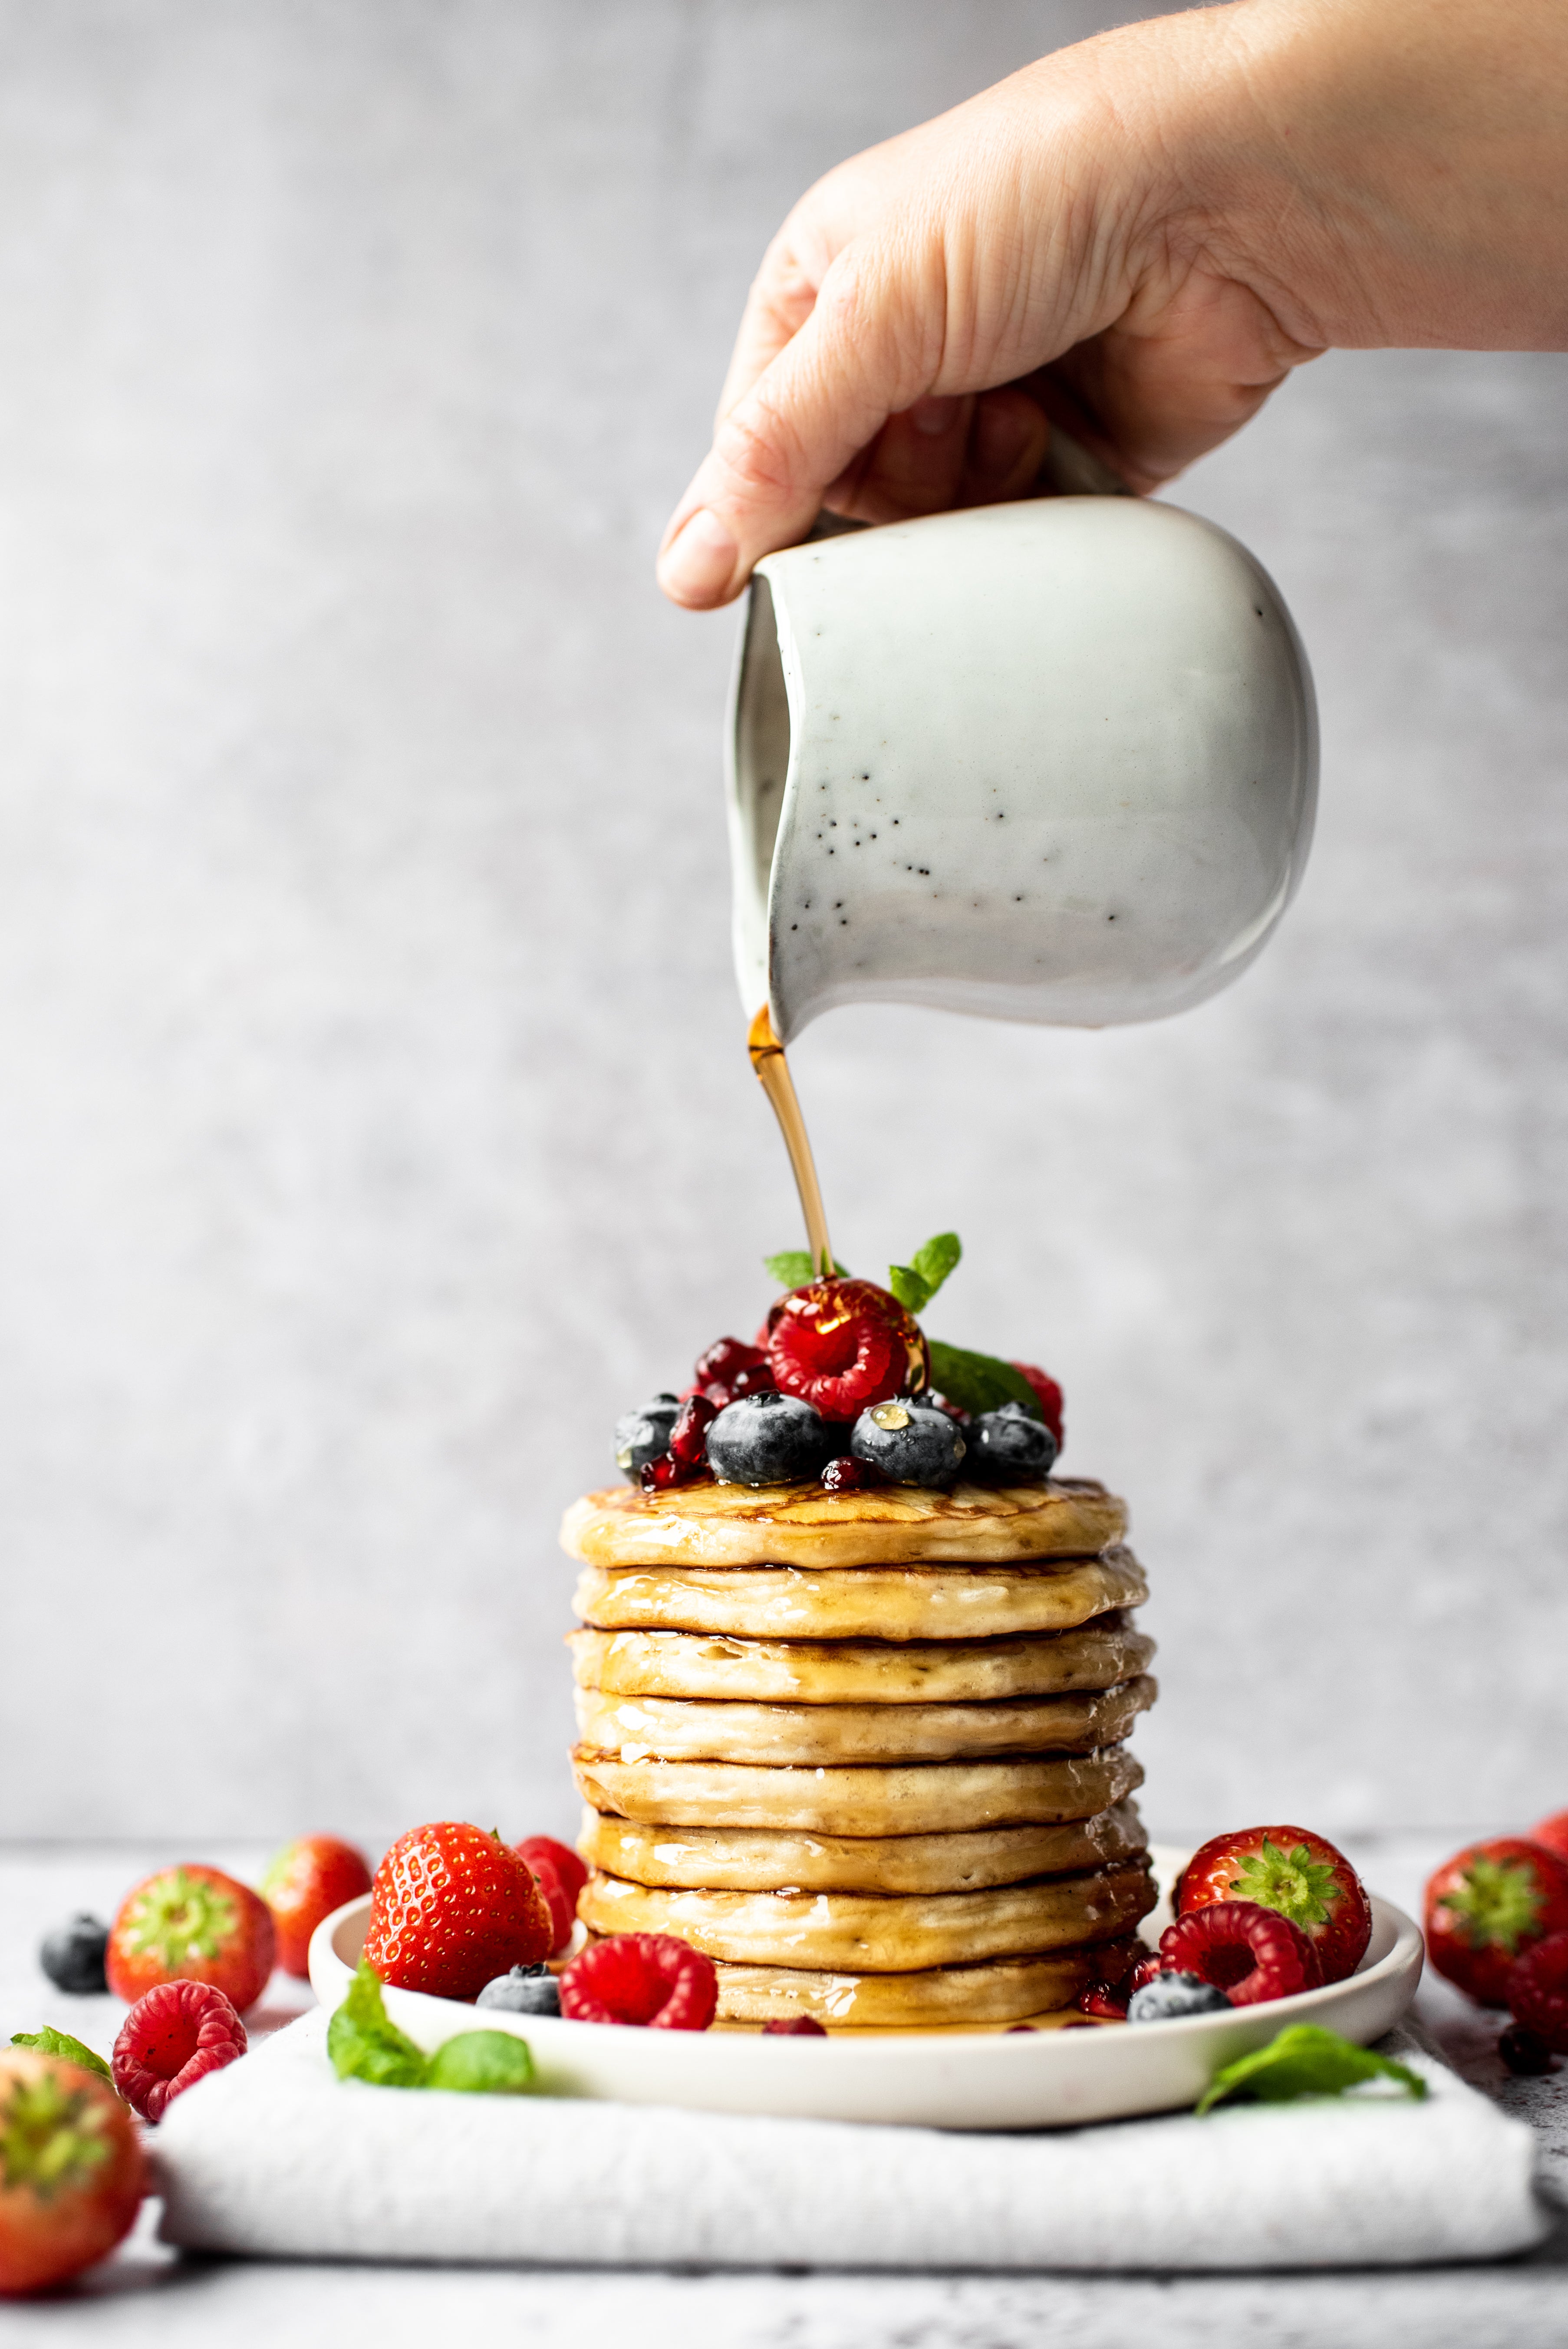 Pouring maple syrup over a stack of American pancakes